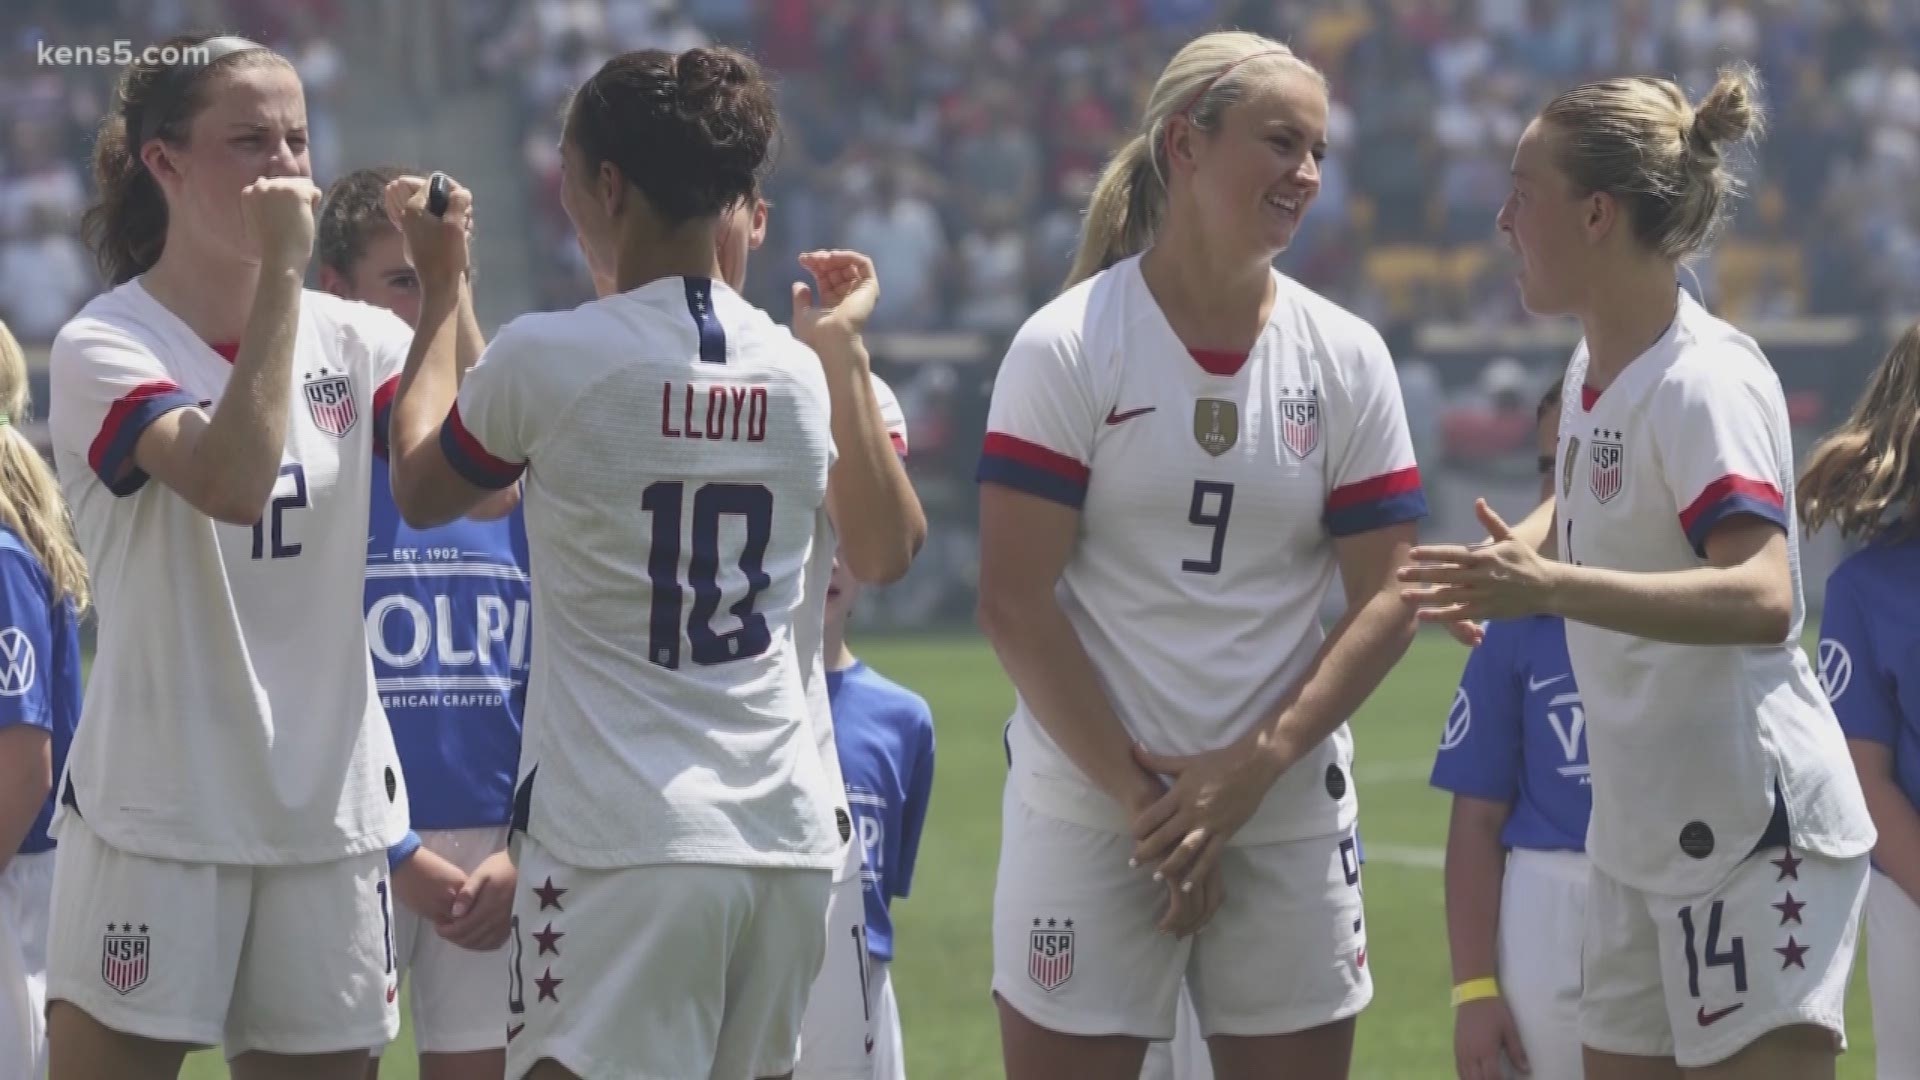 Before Team USA even flew to France the U.S. Women's National team sued the U.S. Soccer federation in federal court stating institutional gender discrimination.